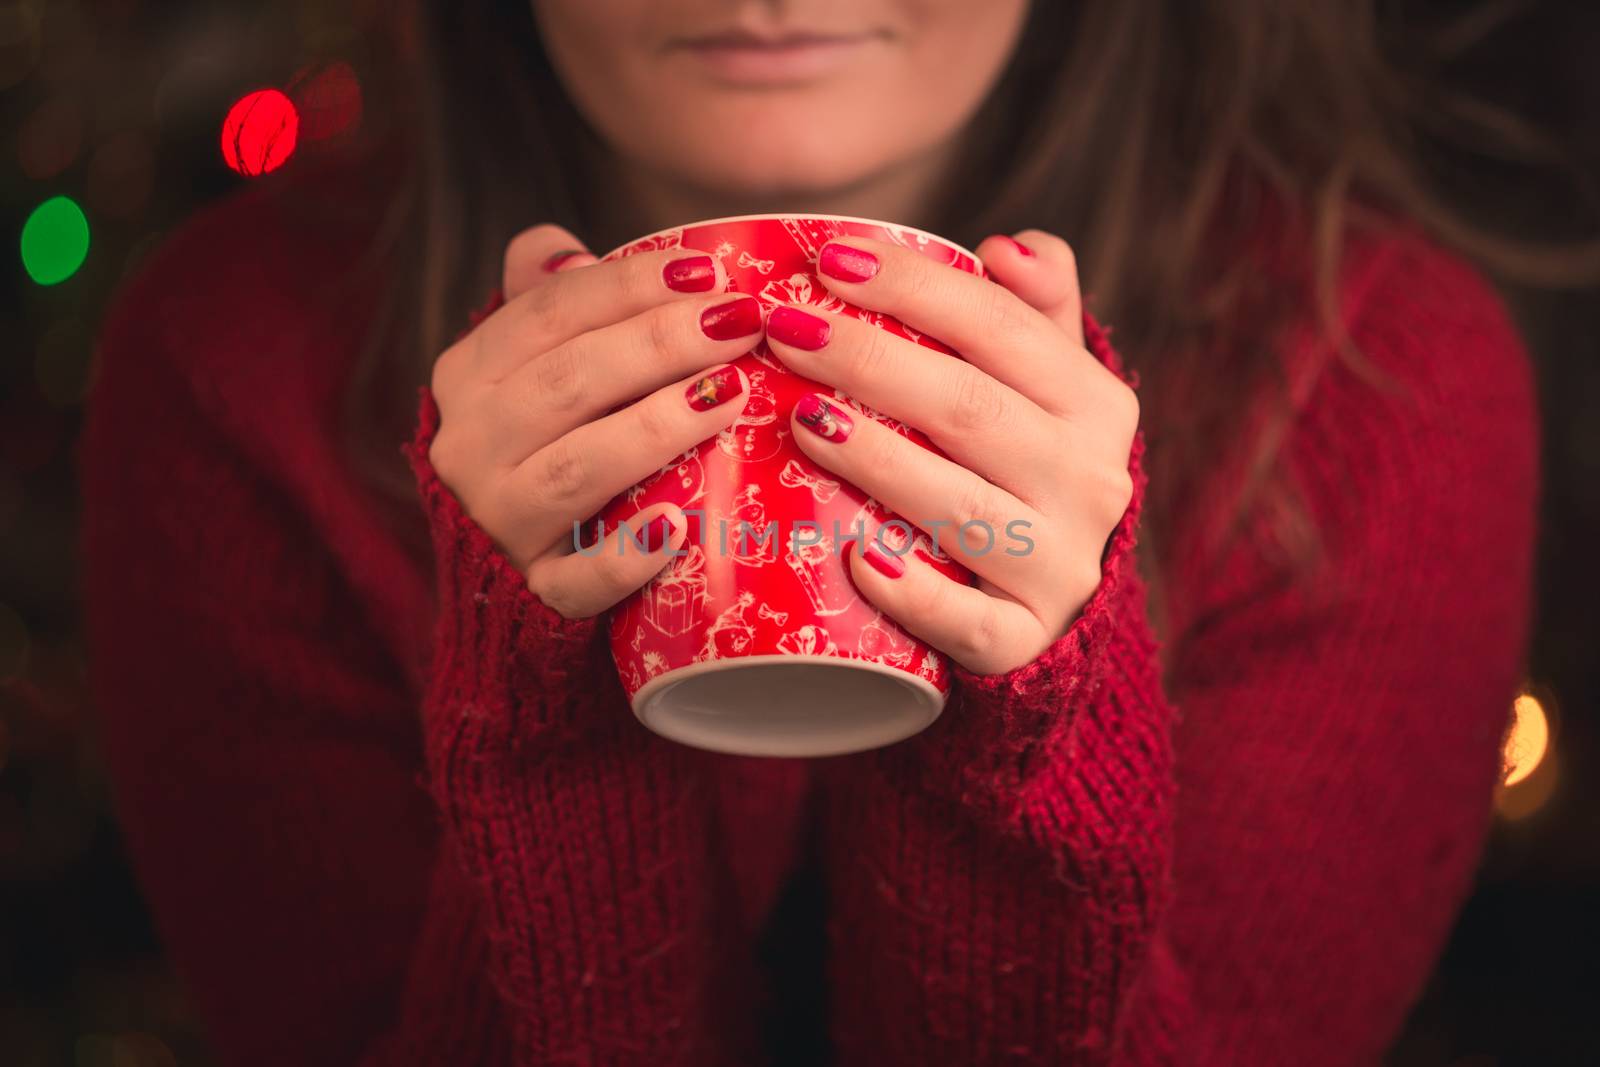 Woman holding winter cup with nice Christmas motive close up on Christmas background.